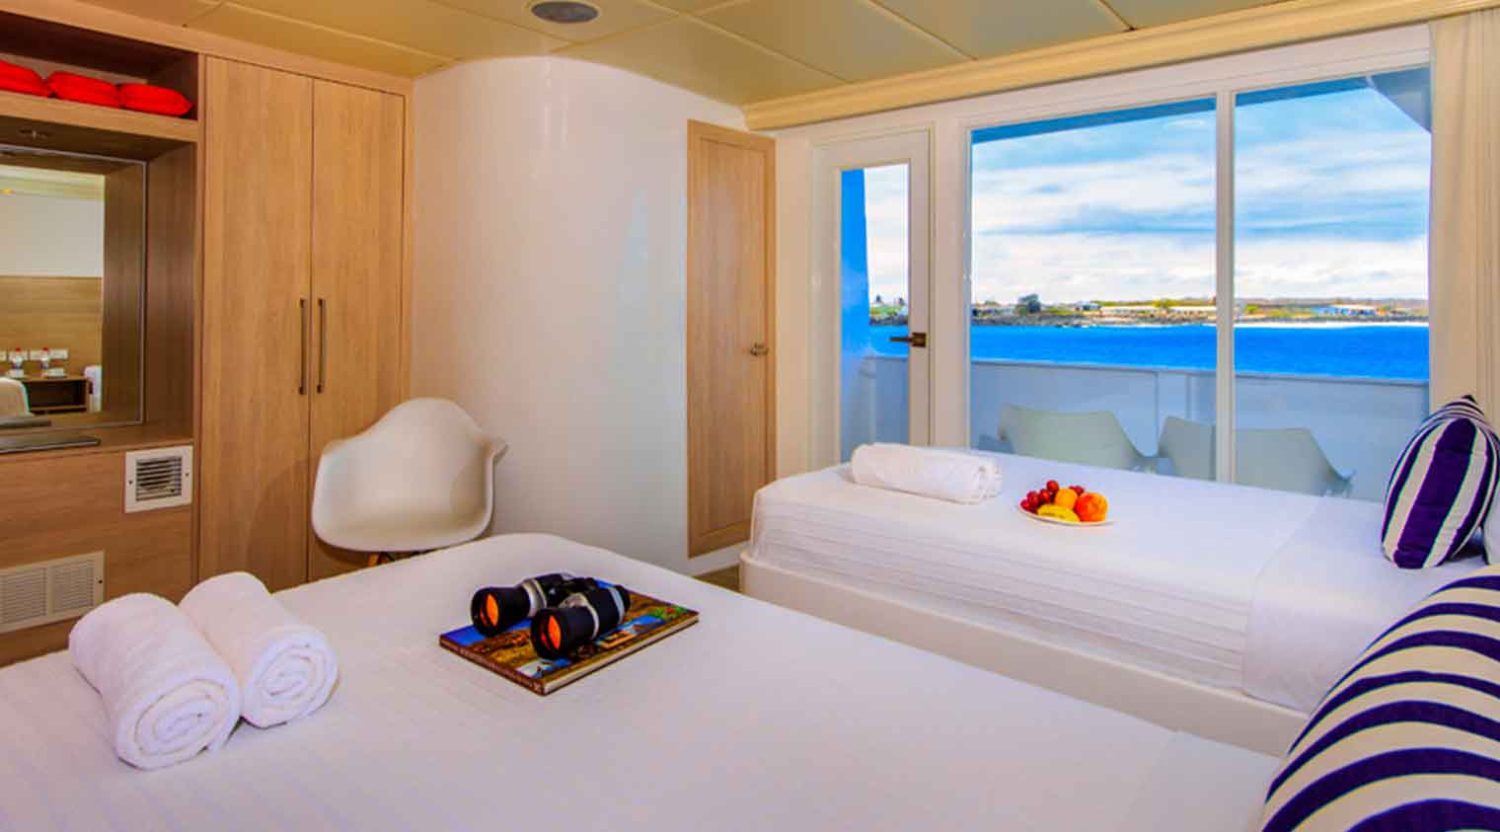 treasure of galapagos yacht double room of galapagos islands tours